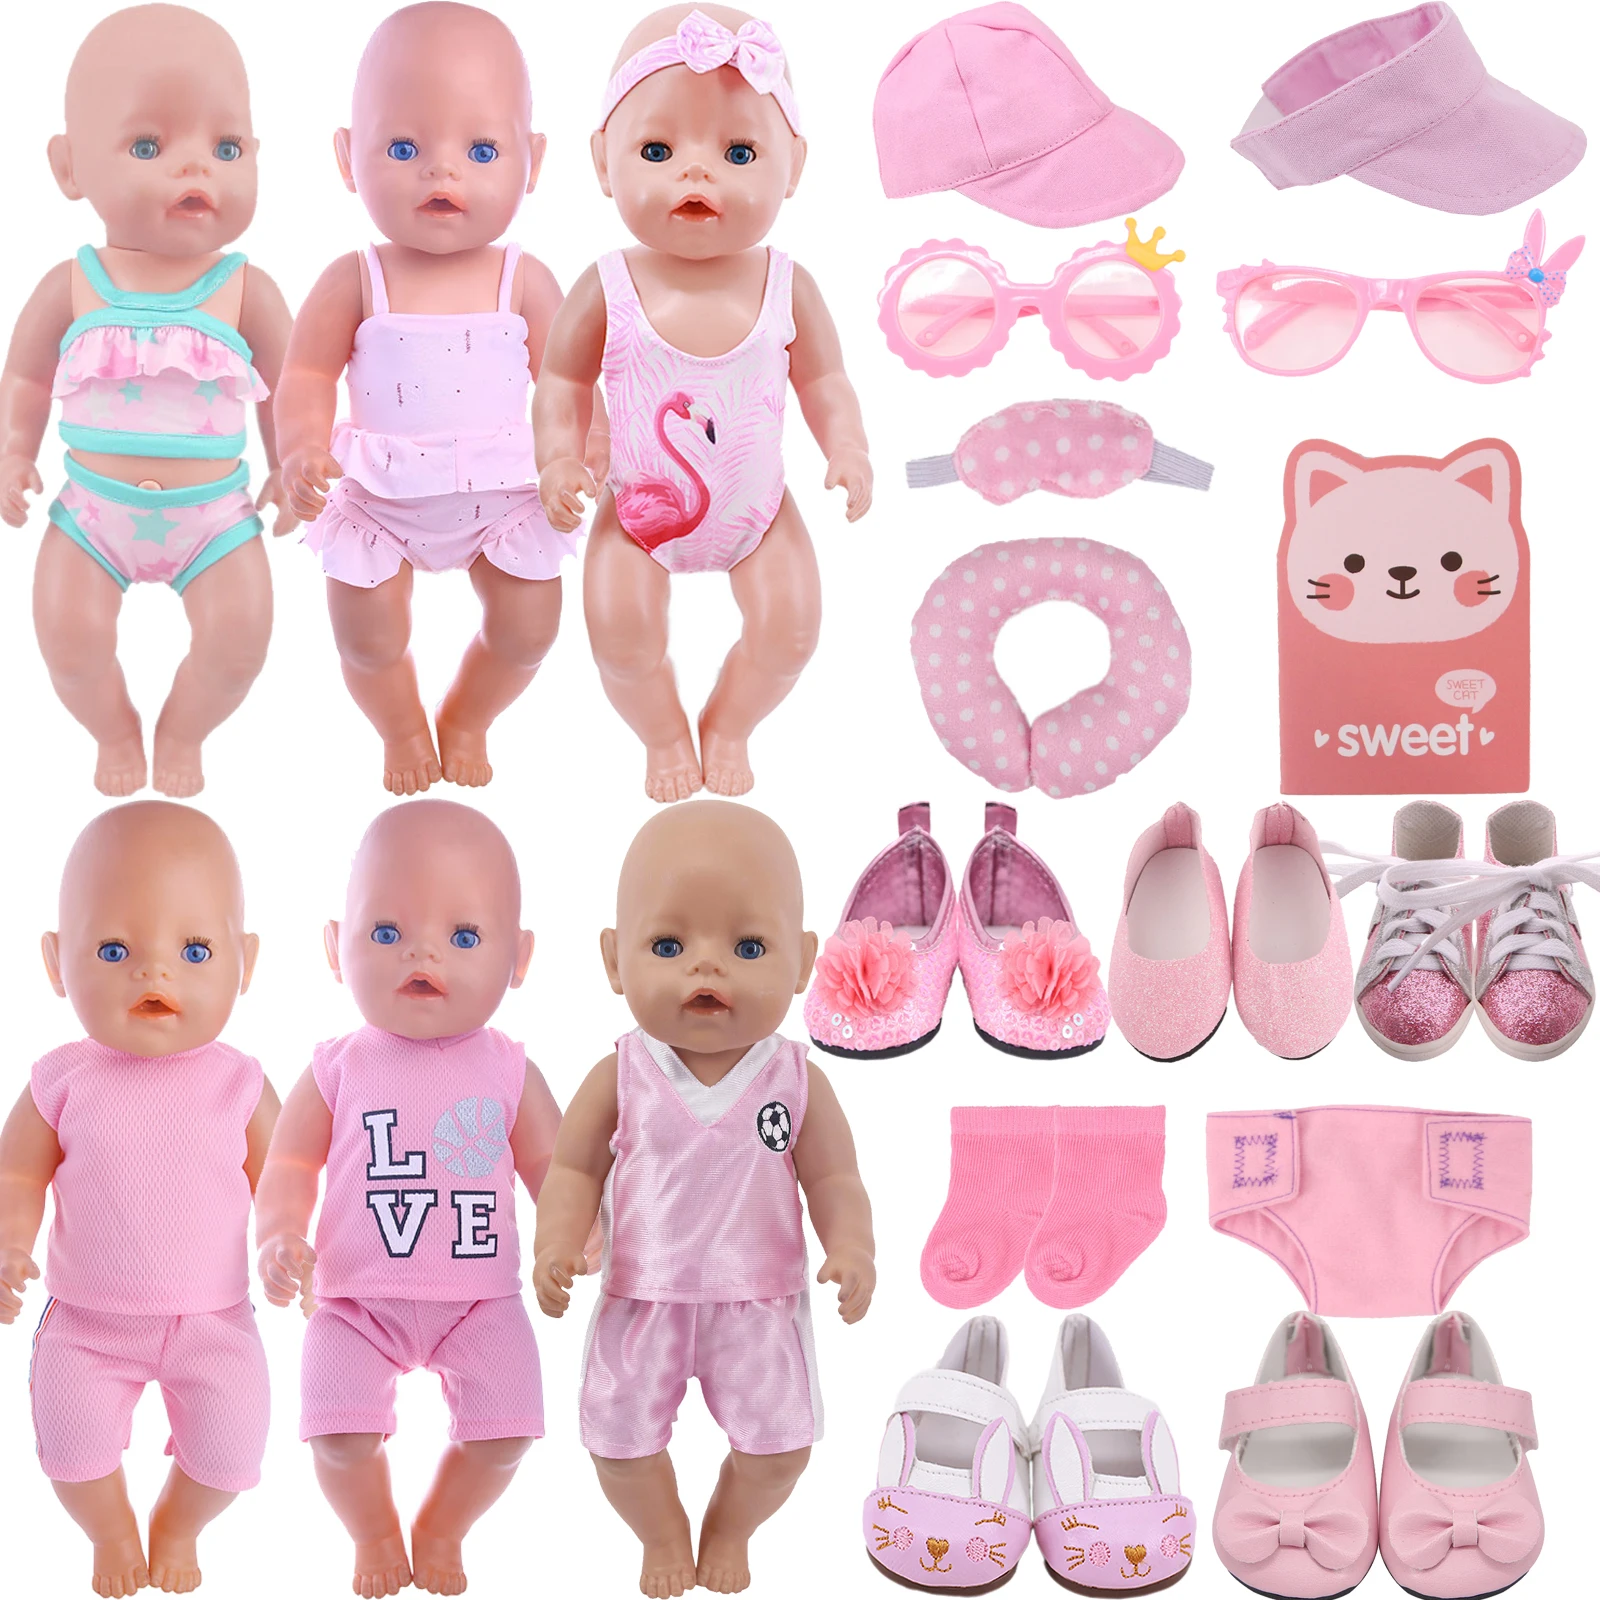 unisex sports clothes shoes accessories football for 18inch american doll clothes 43cm reborn baby doll our generation uniform Doll Clothes Pink Swimsuit,Sports Wear,PU Shoes For 18Inch Girl Of American&43 Cm Reborn Baby Doll Accessories,Generation Gifts